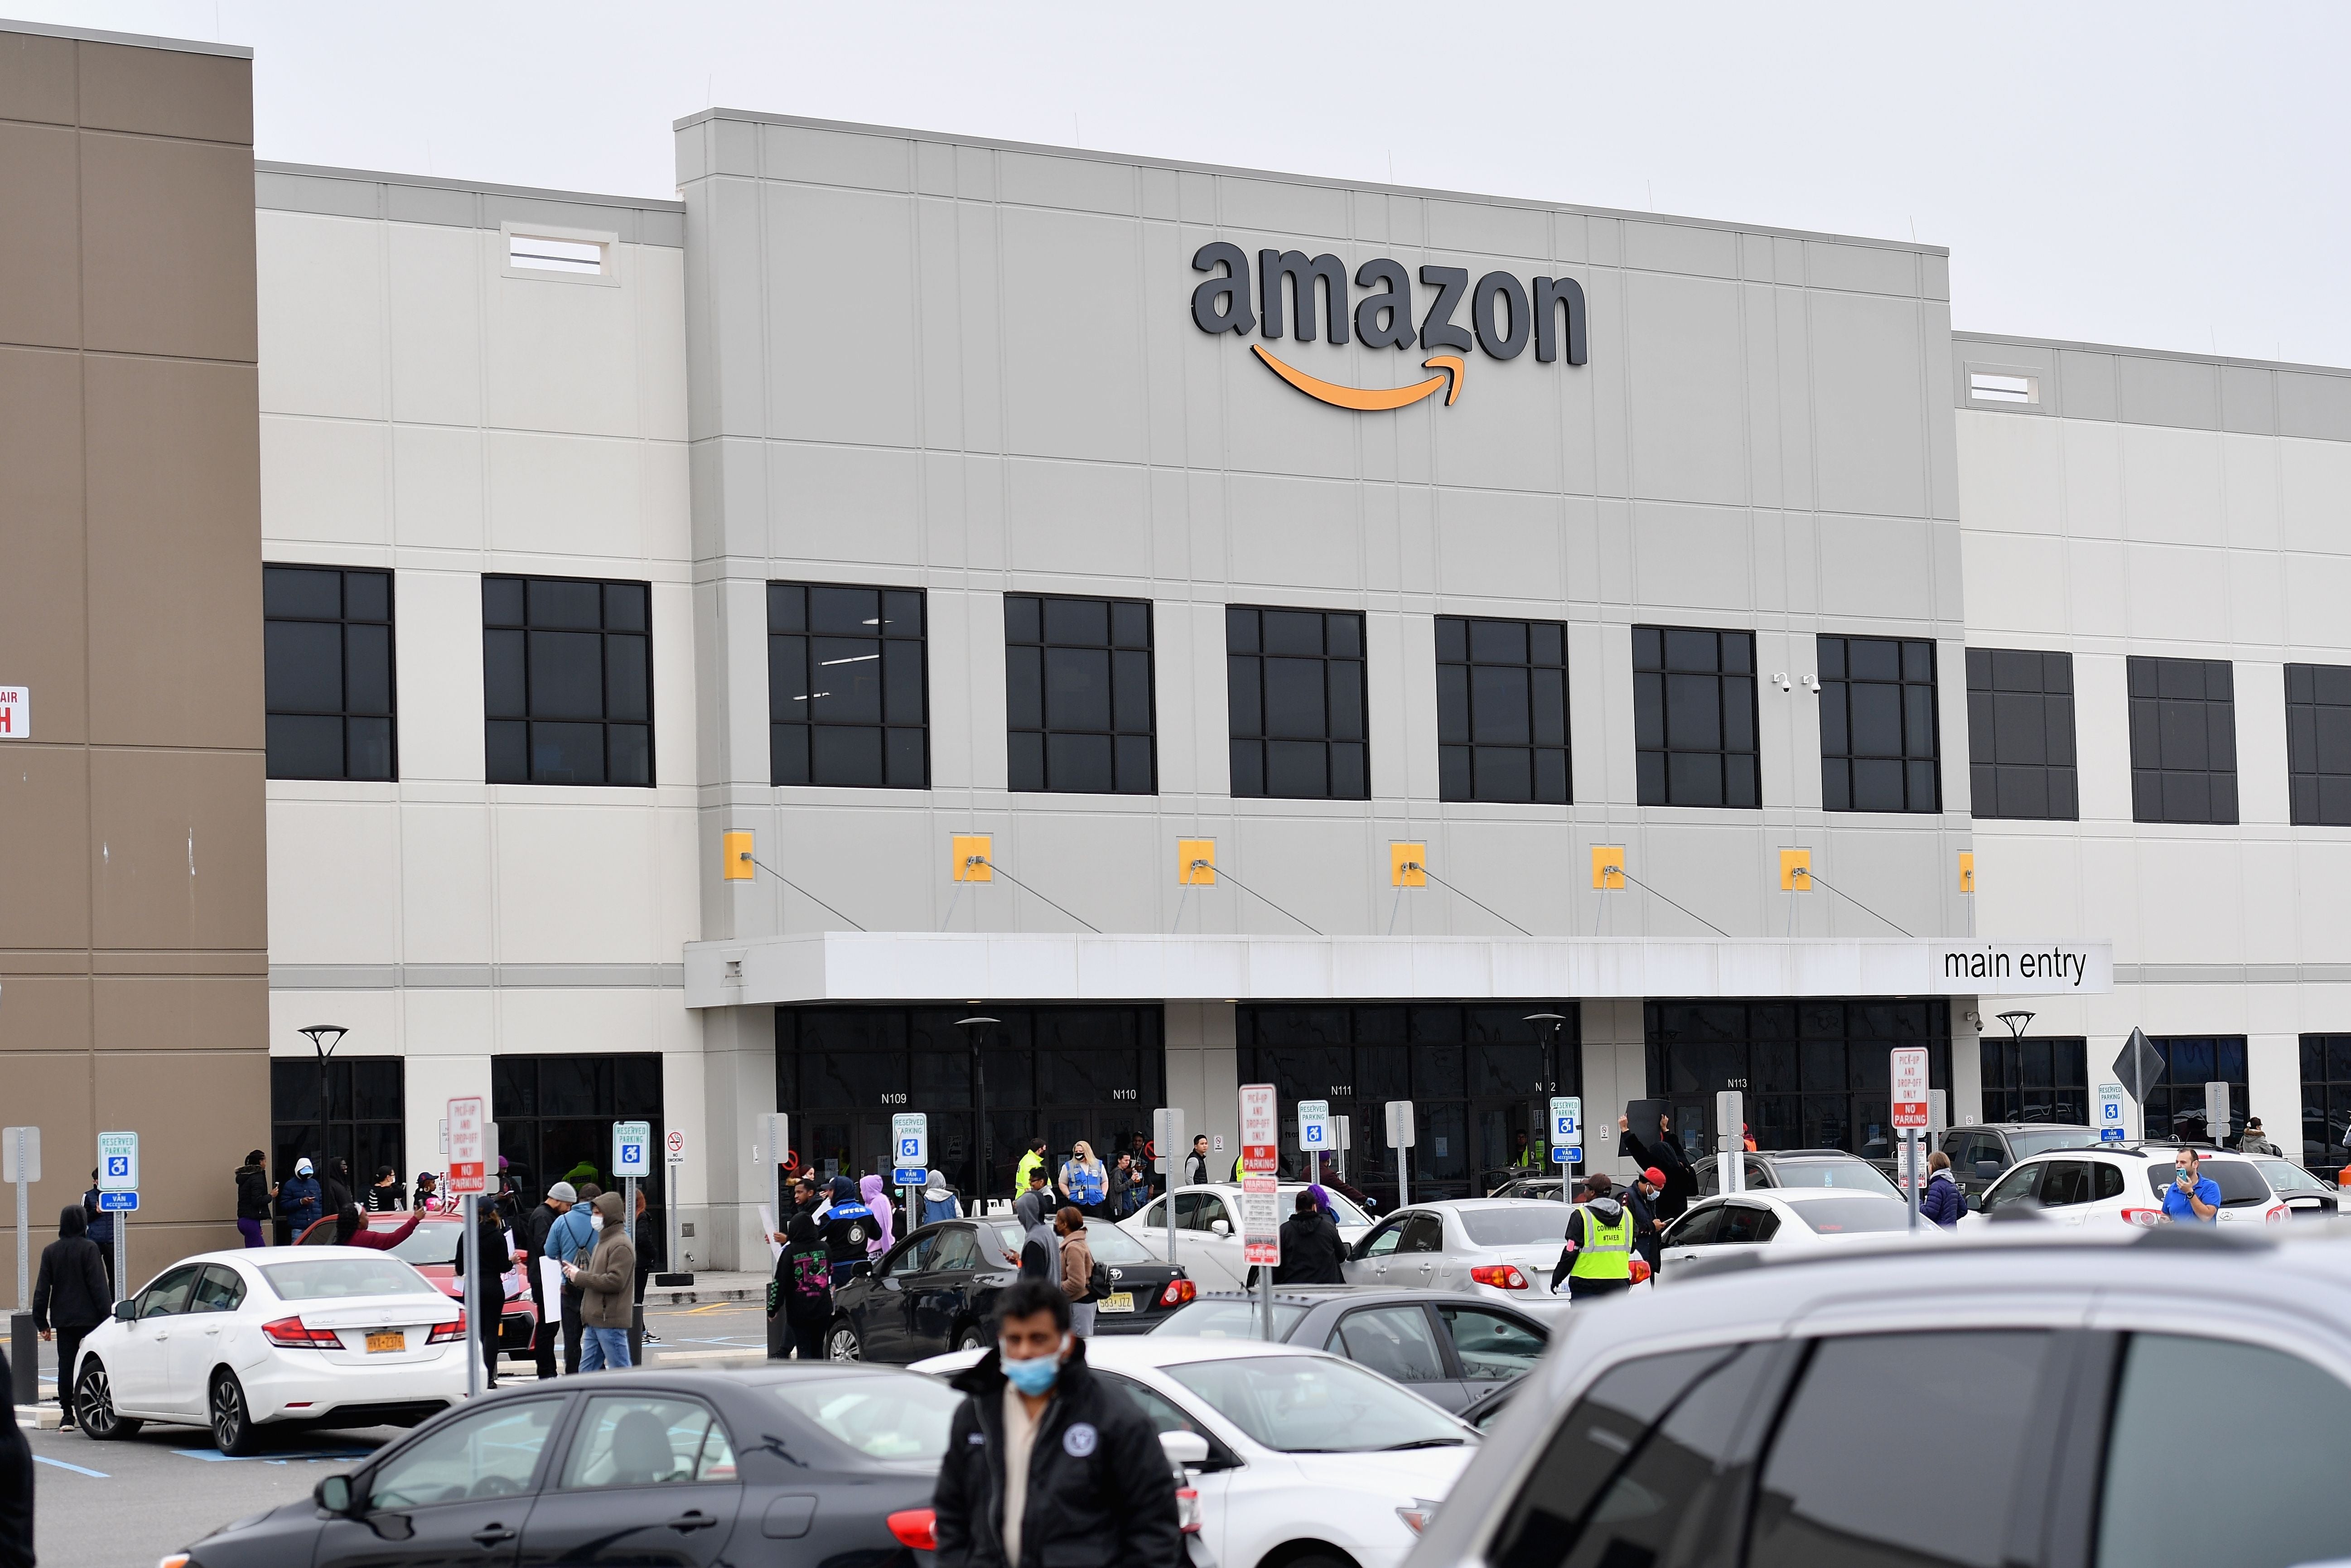 Amazon workers at the Staten Island warehouse strike